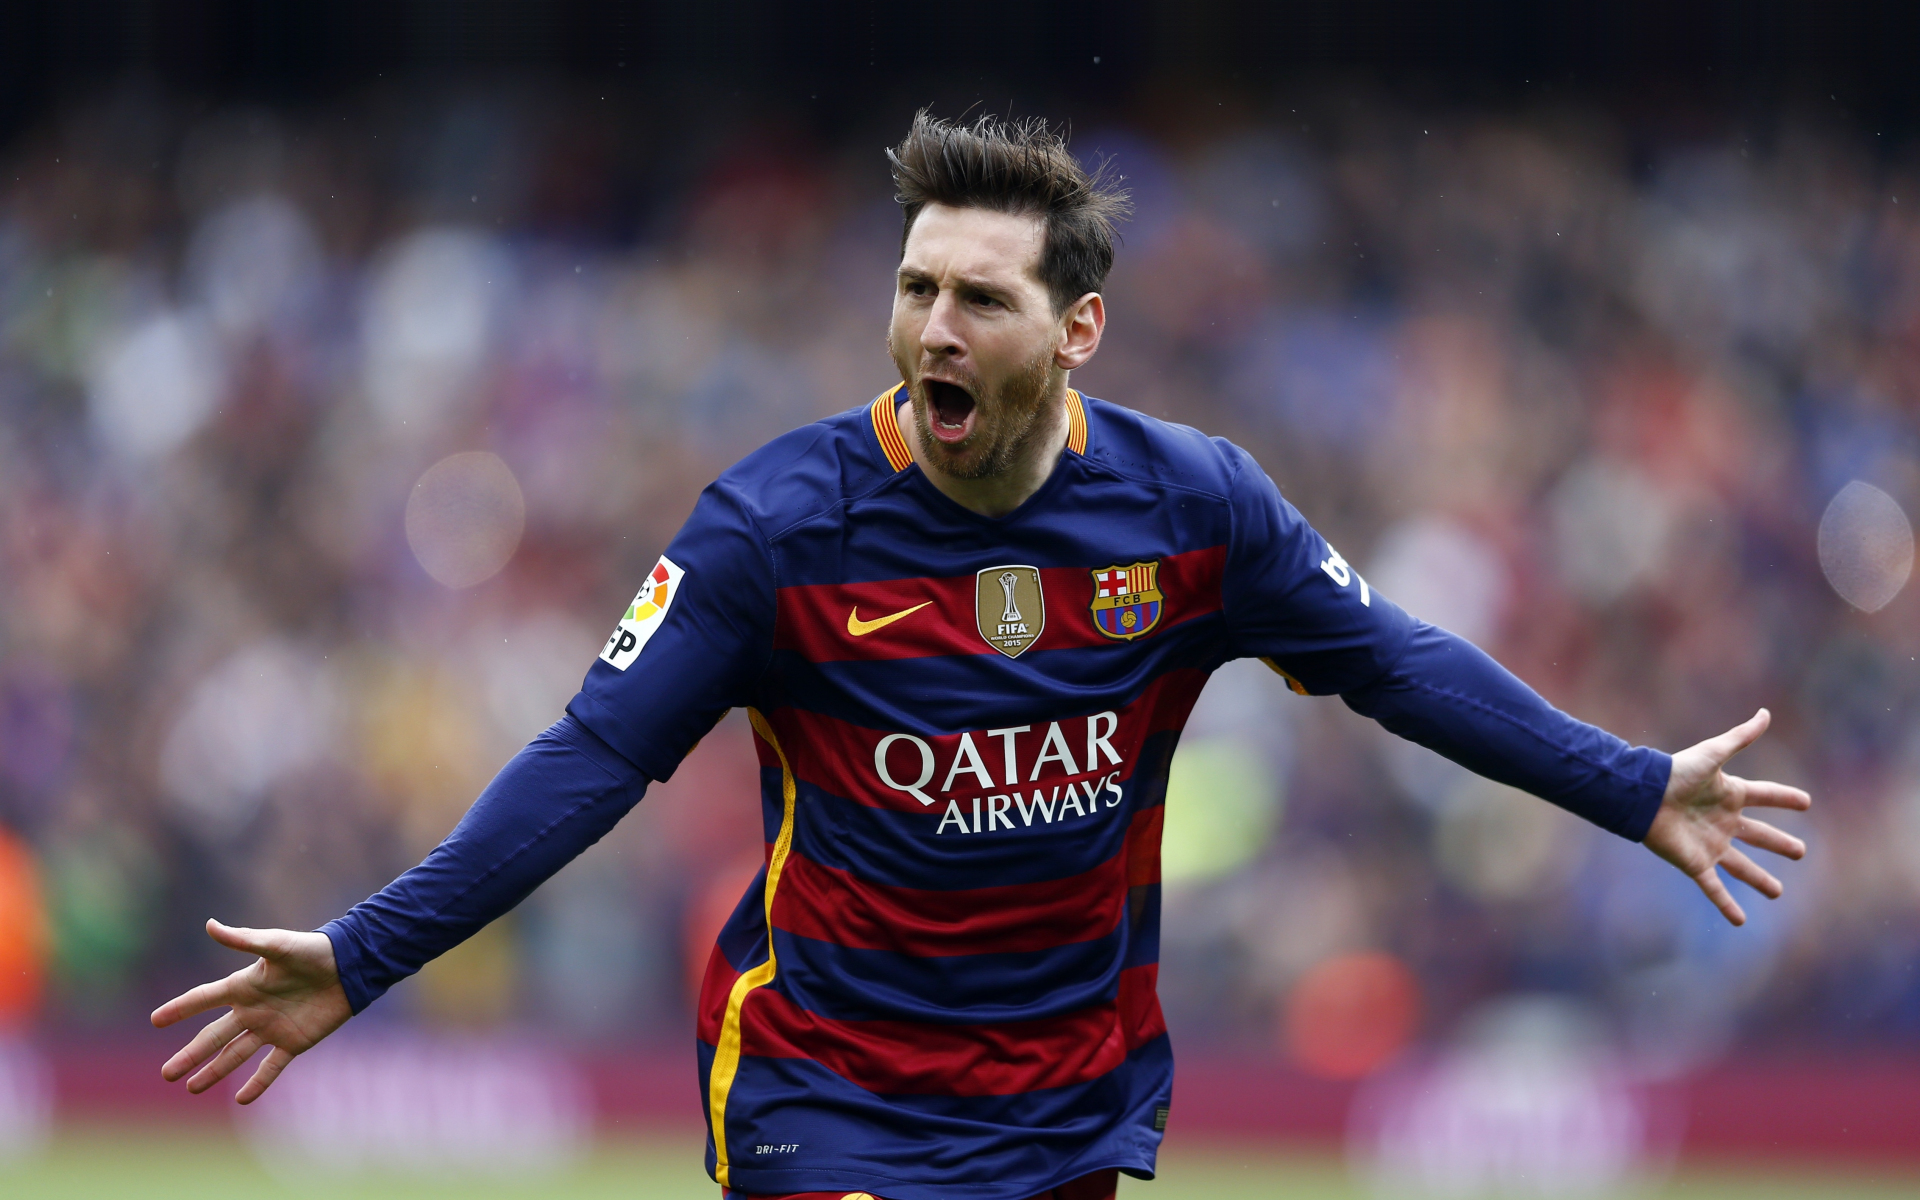 Download wallpaper 1920x1200 lionel messi, goal, celebrity, football  player, 16:10 widescreen 1920x1200 hd background, 9589